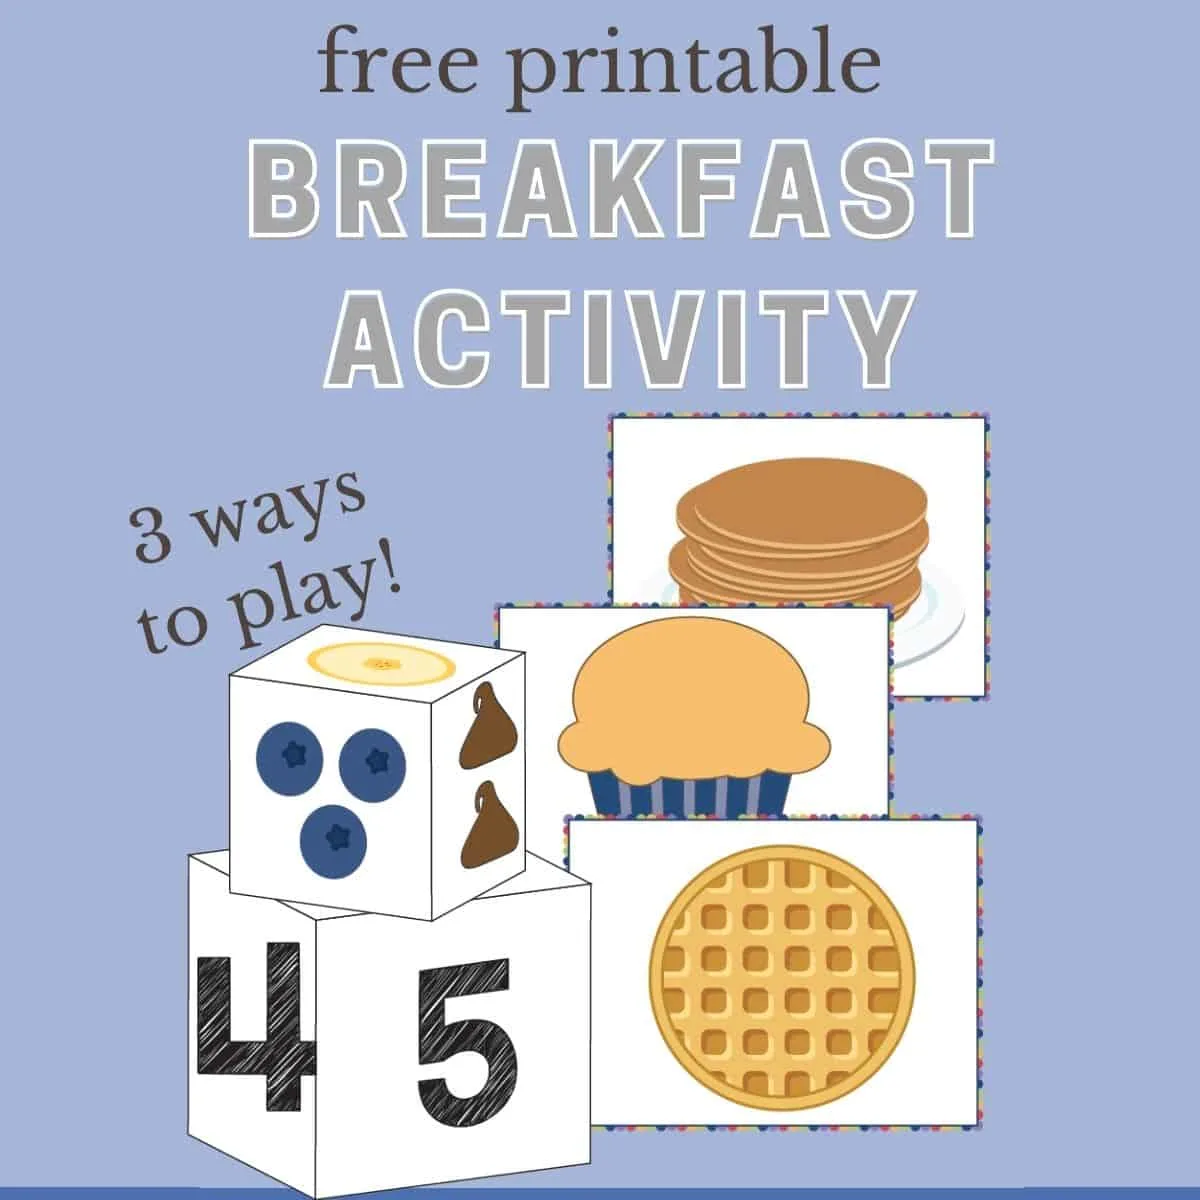 Graphic of free printable breakfast activity for toddlers.